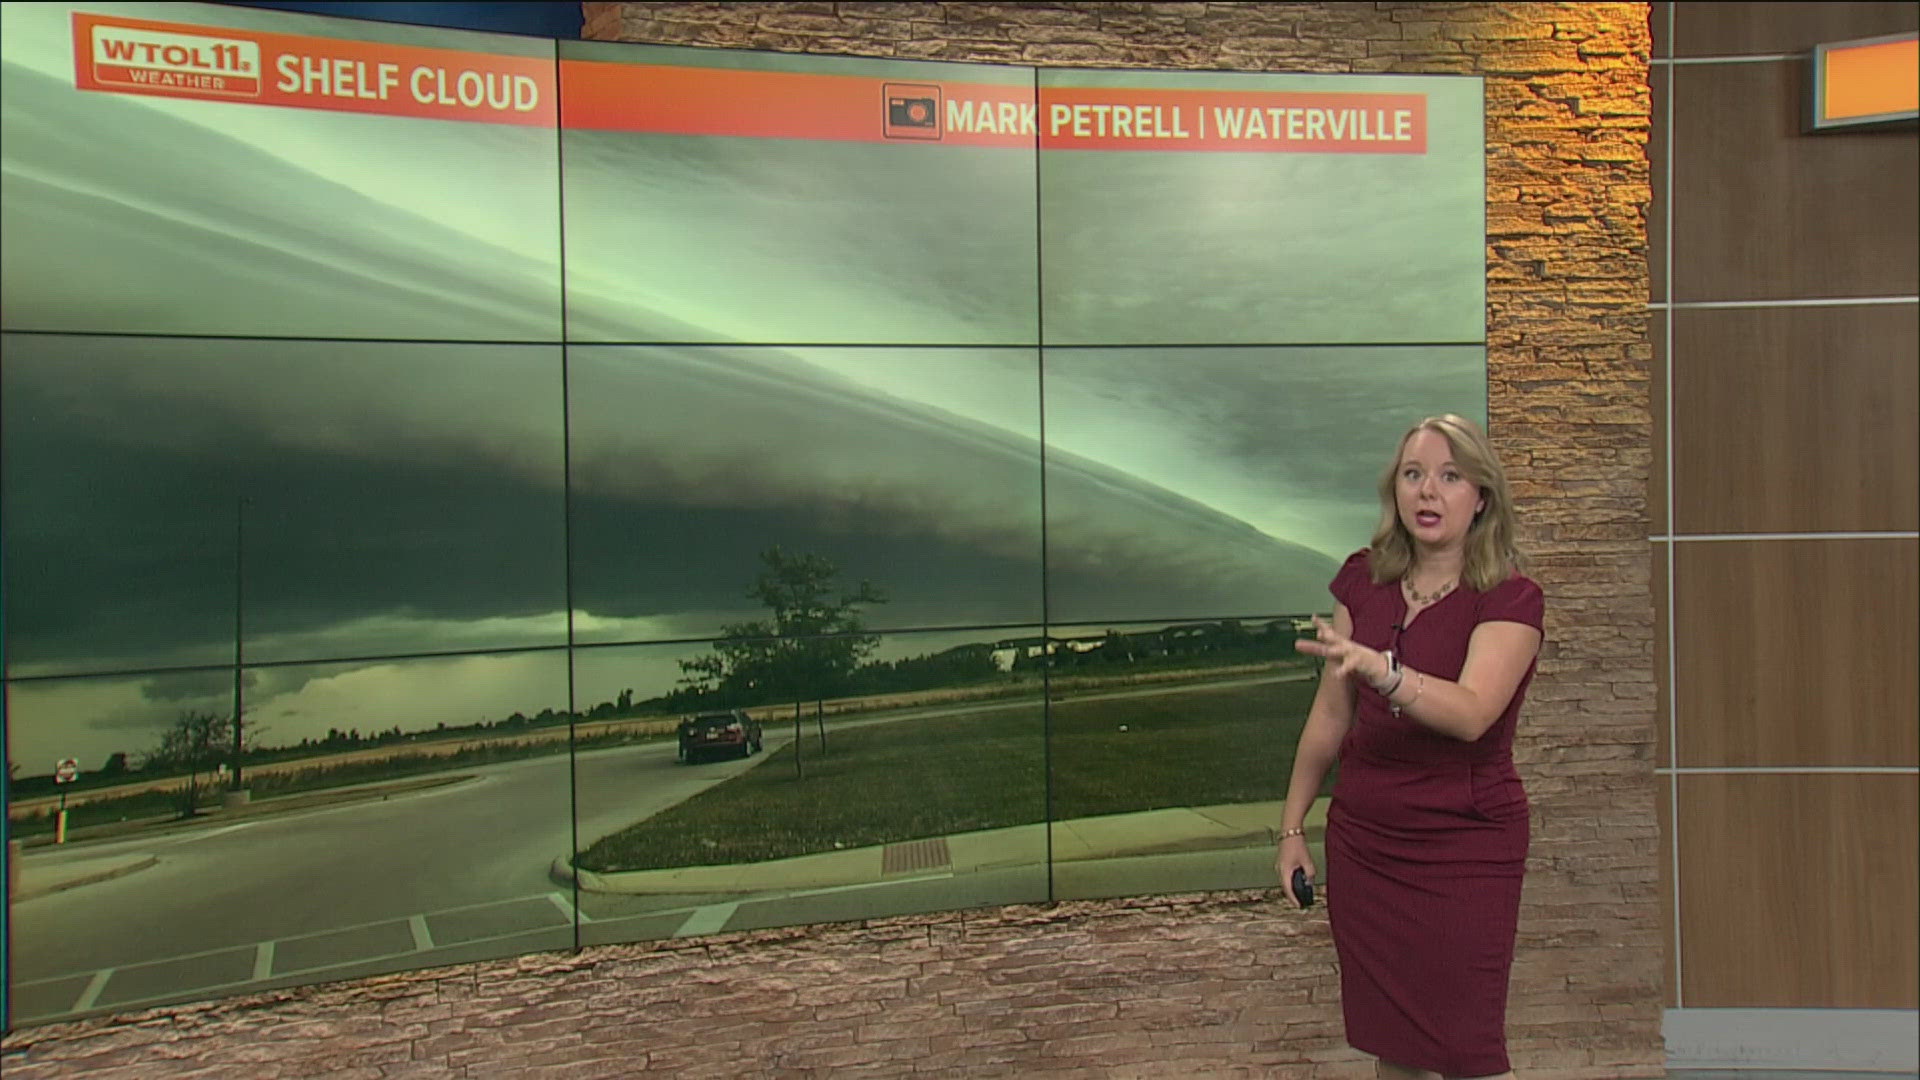 WTOL 11 viewers shared their photos and videos of Tuesday morning's shelf cloud and storms.